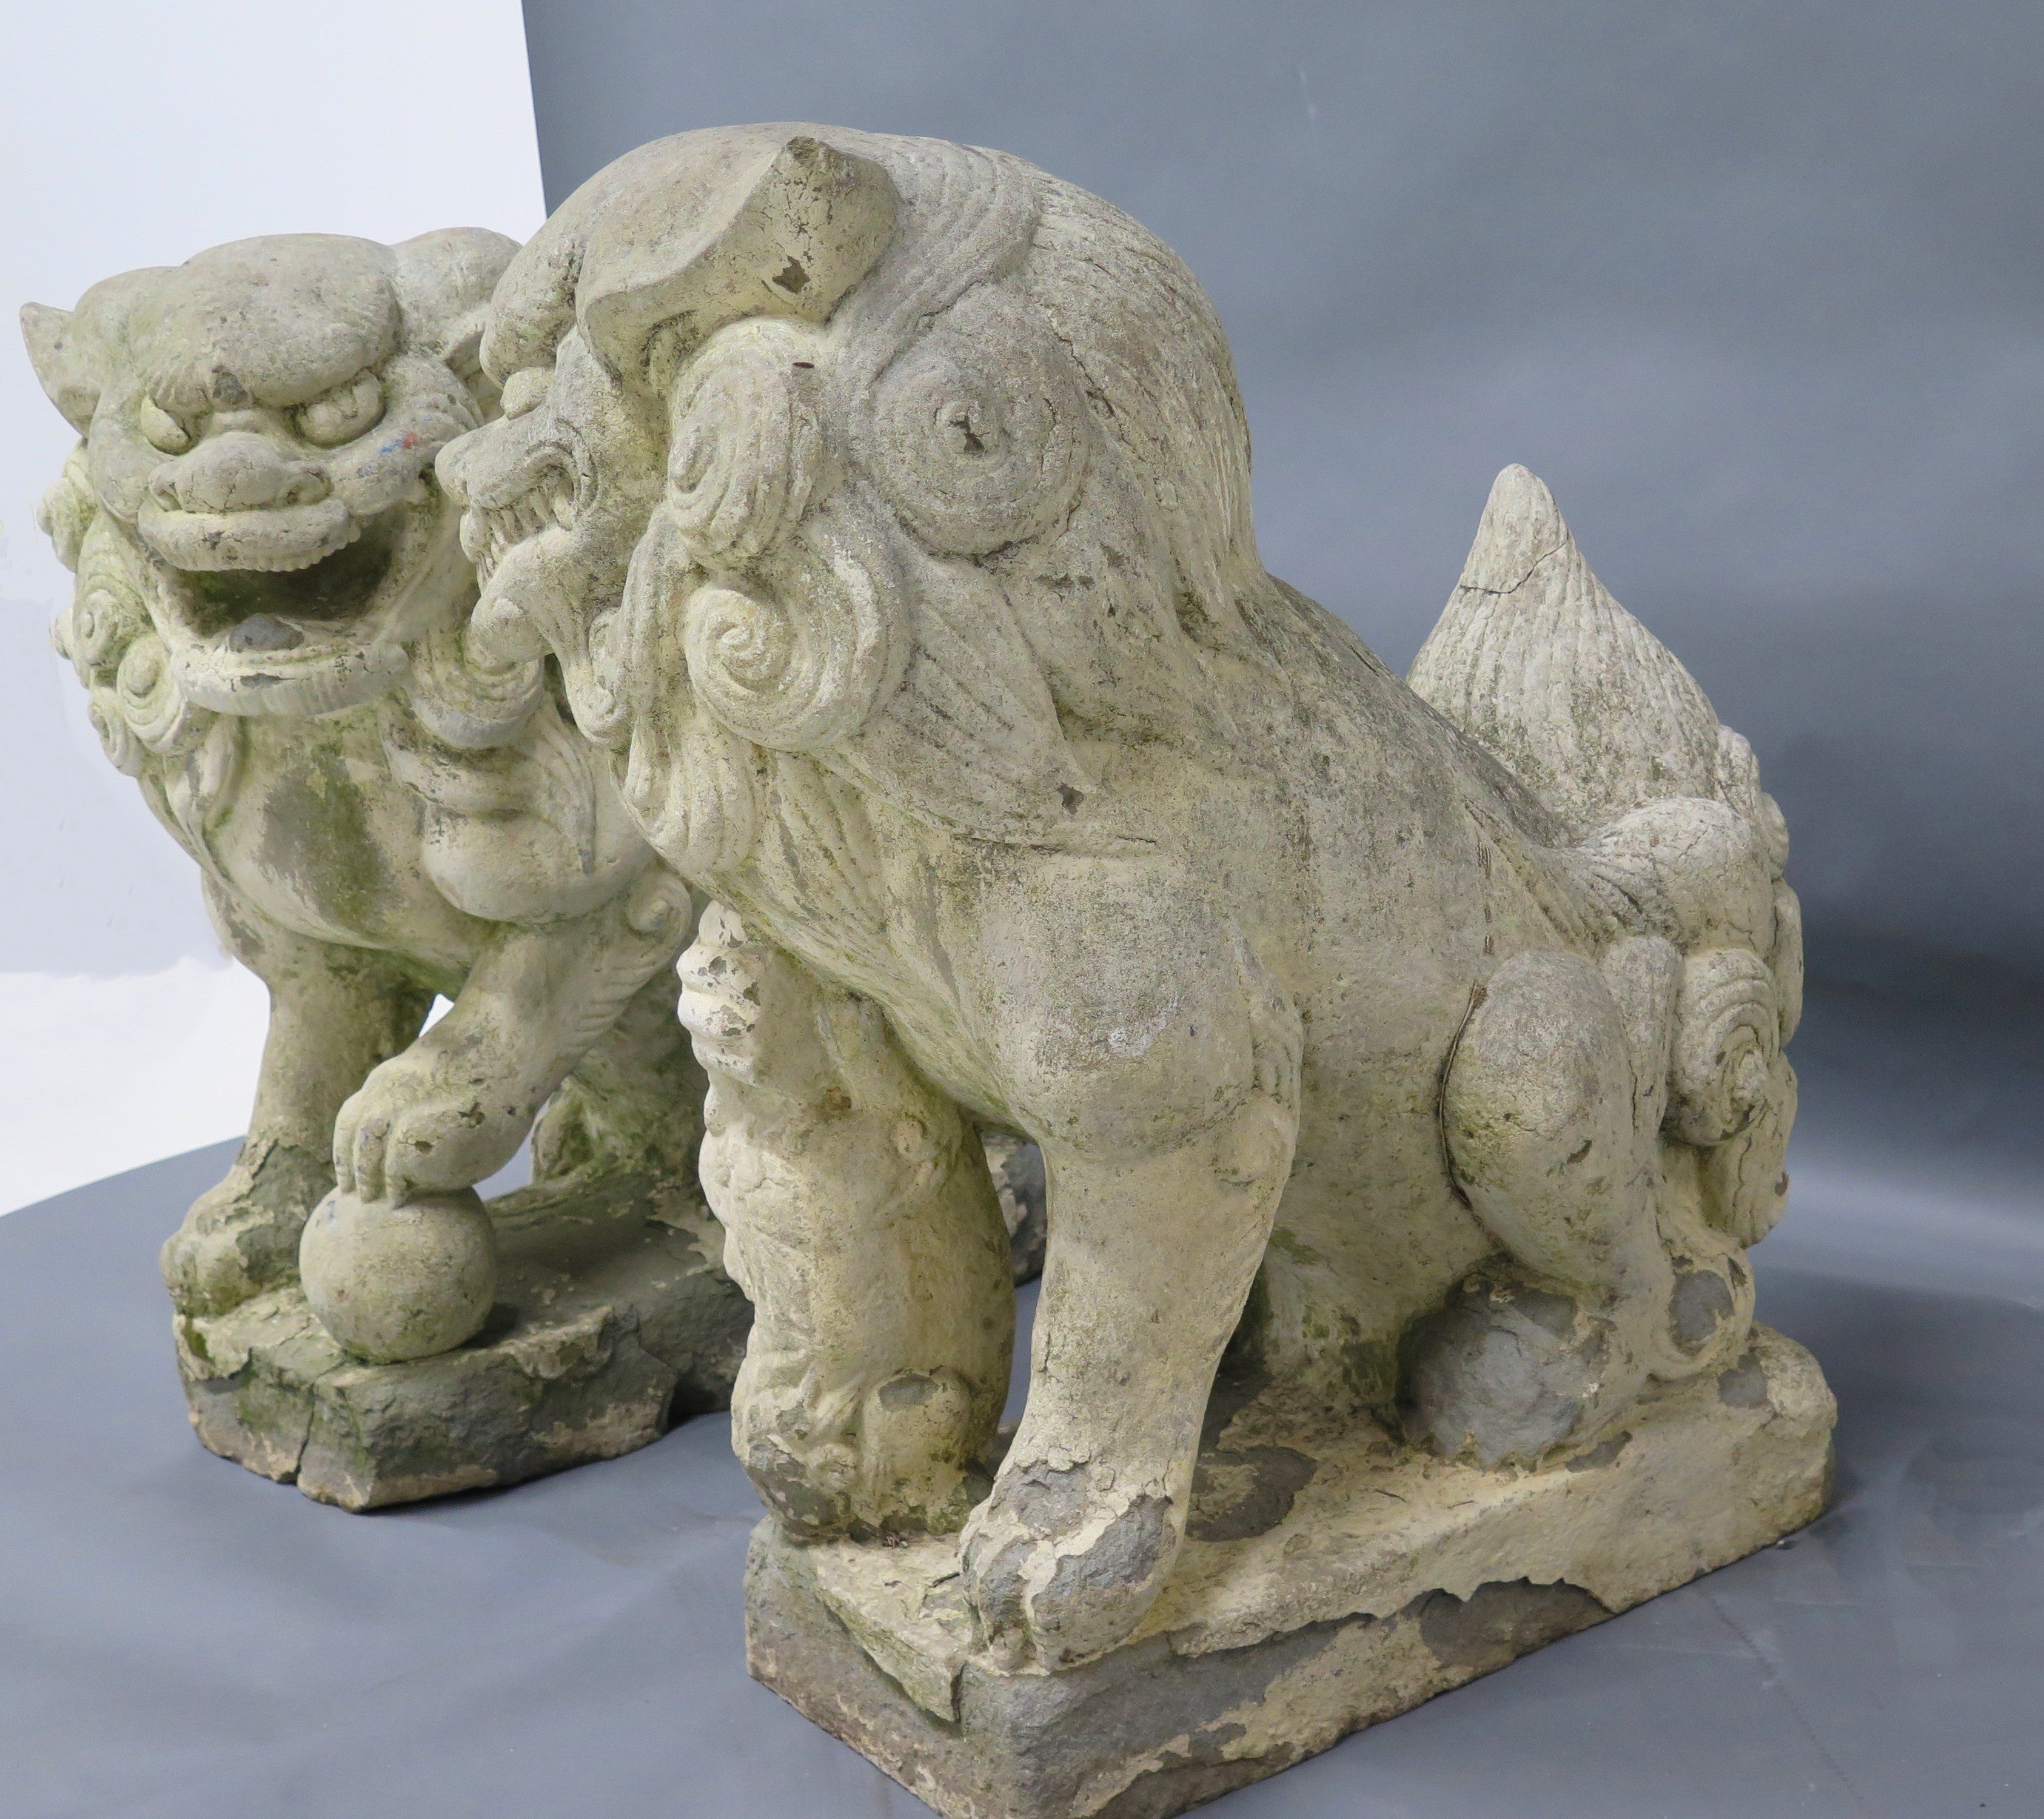 Pair of Large Scale Carved Stone Chinese Foo Dogs / Temple Lions